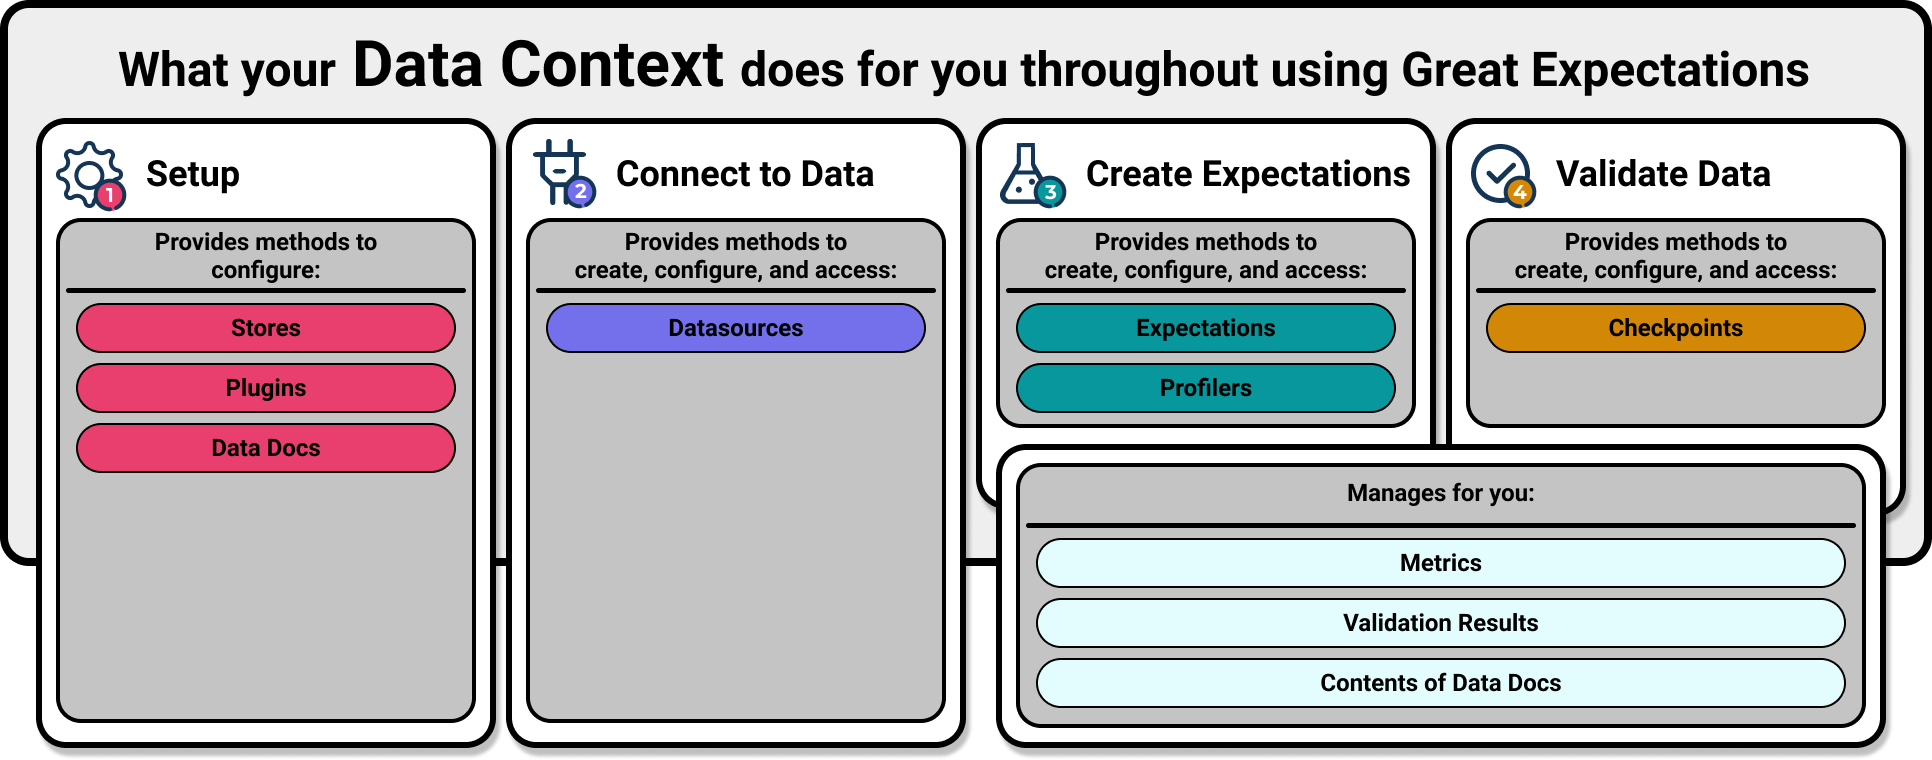 What your Data Context does for you throughout using Great Expectations